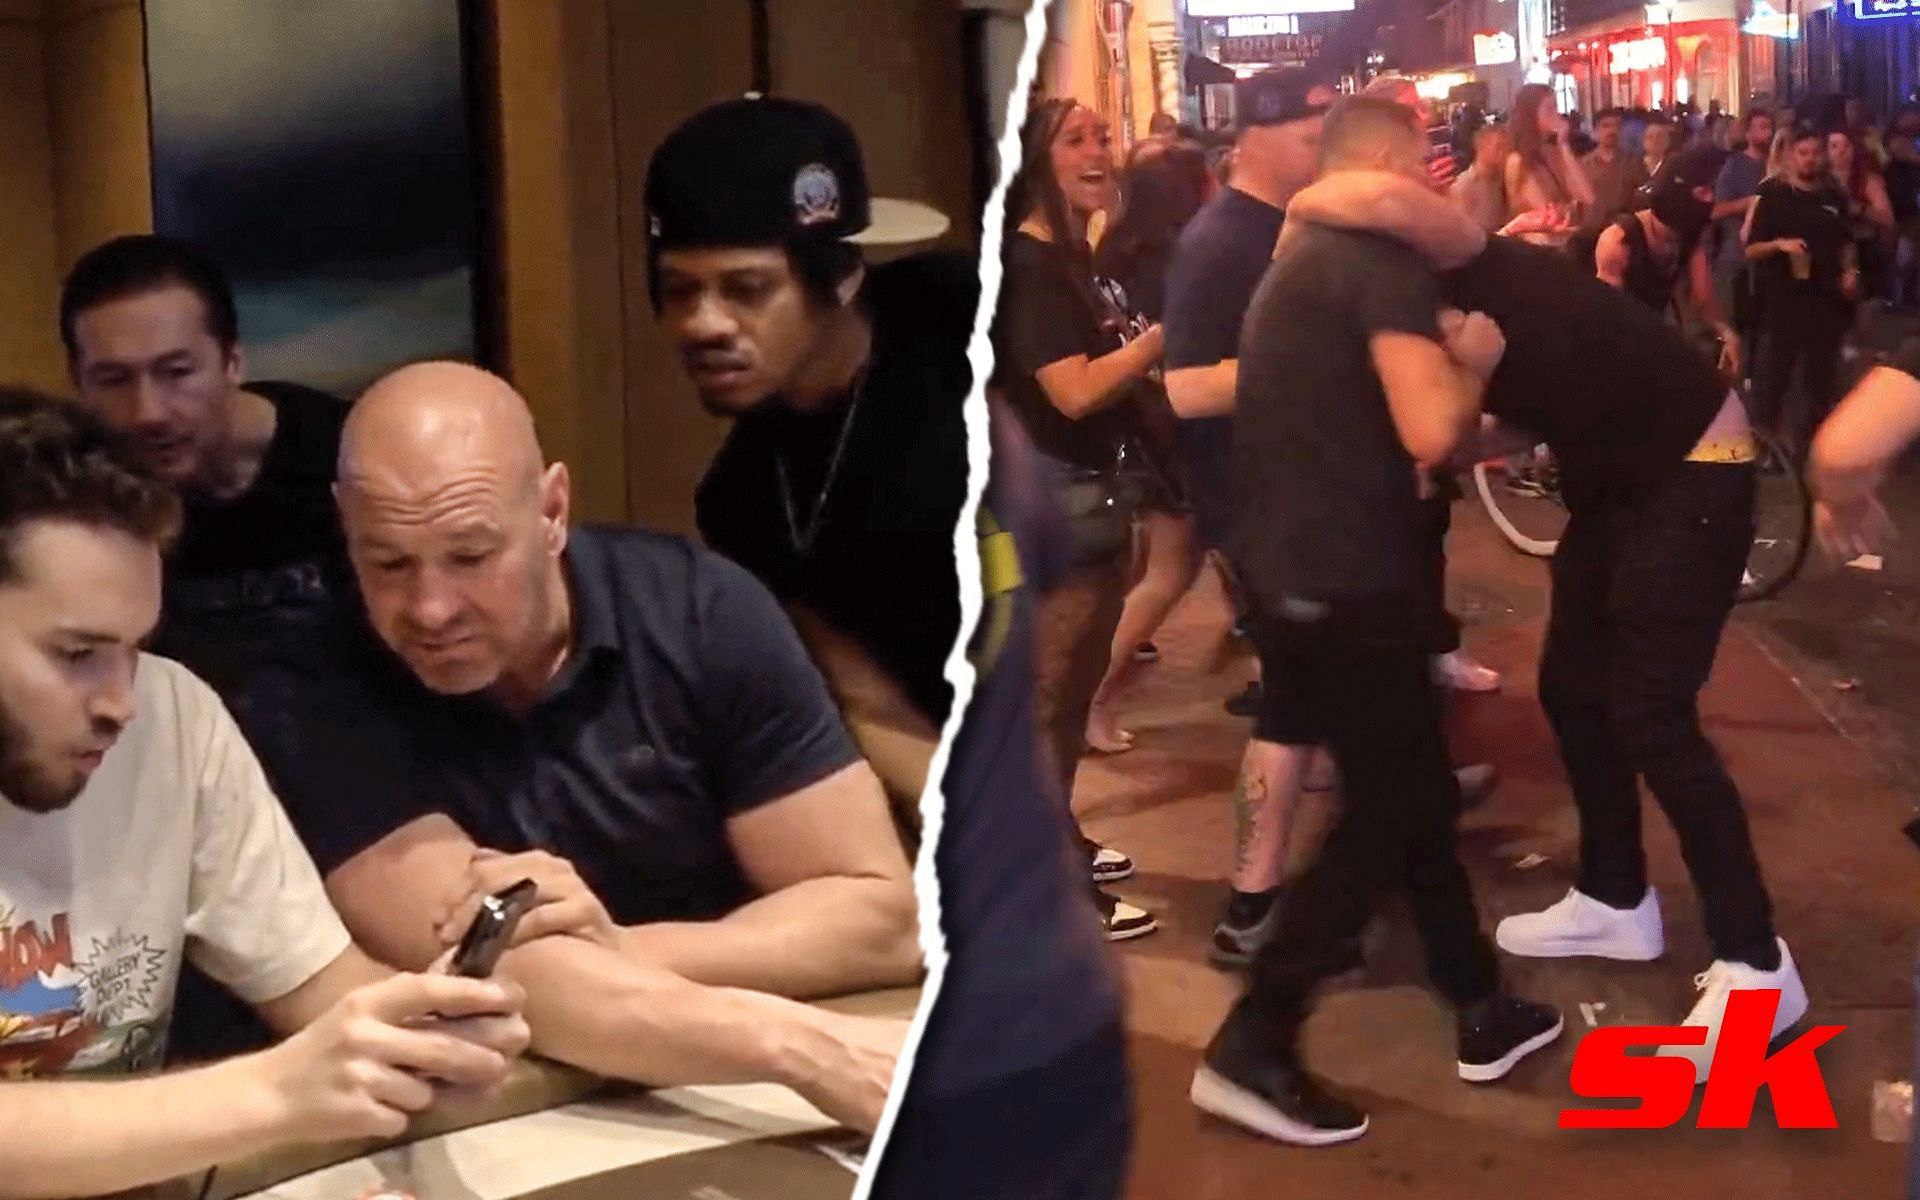 Dana White reacts to Nate Diaz choking out a Logan Paul lookalike in New Orleans [Image credits: @JustTheFights and @FearedBuck on Twitter]